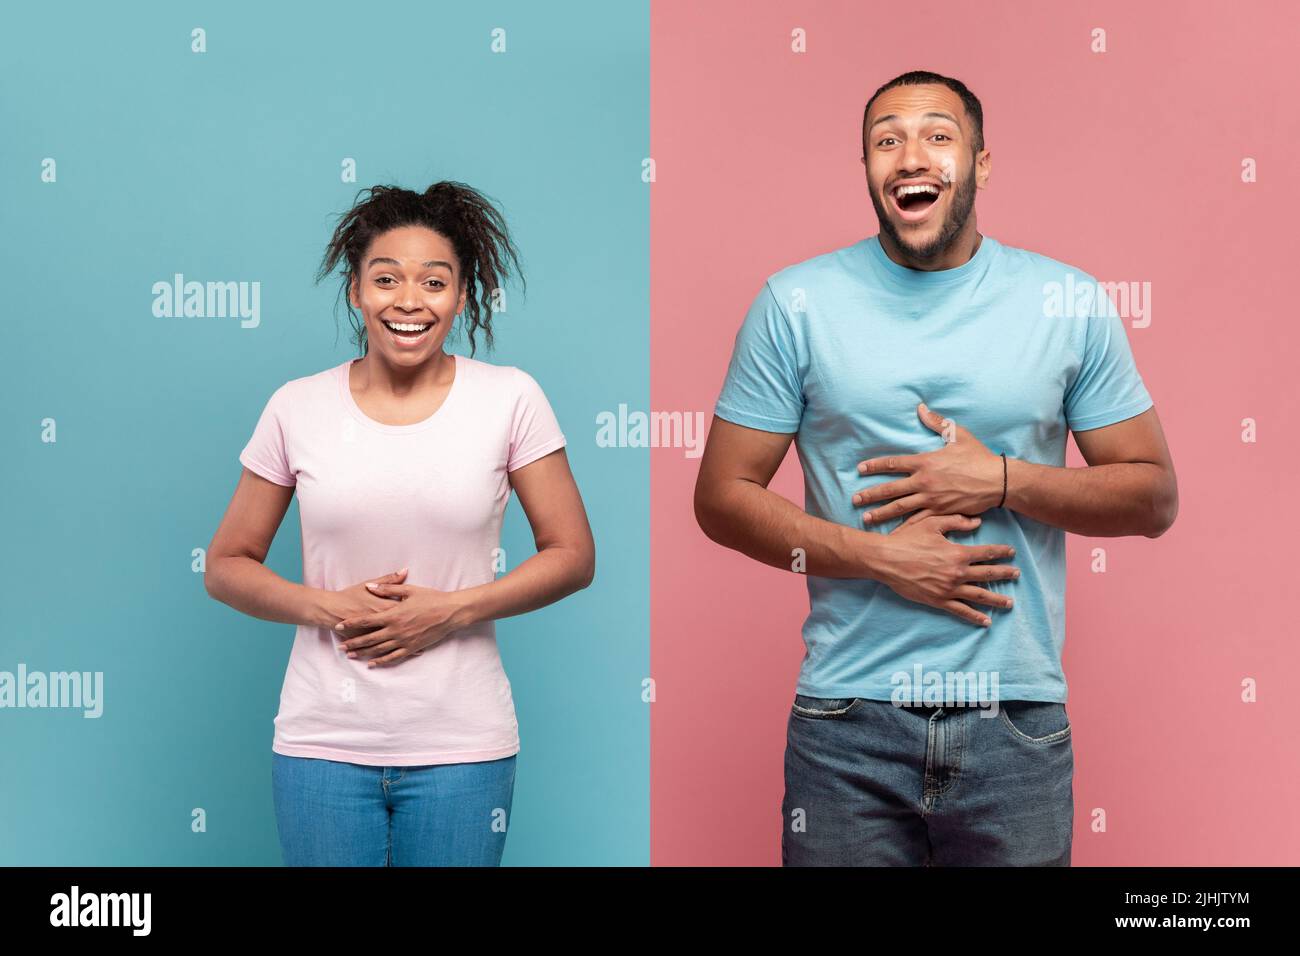 Hilarious black woman and man touching stomachs from laughter, cannot stop laughing, pink and blue background Stock Photo